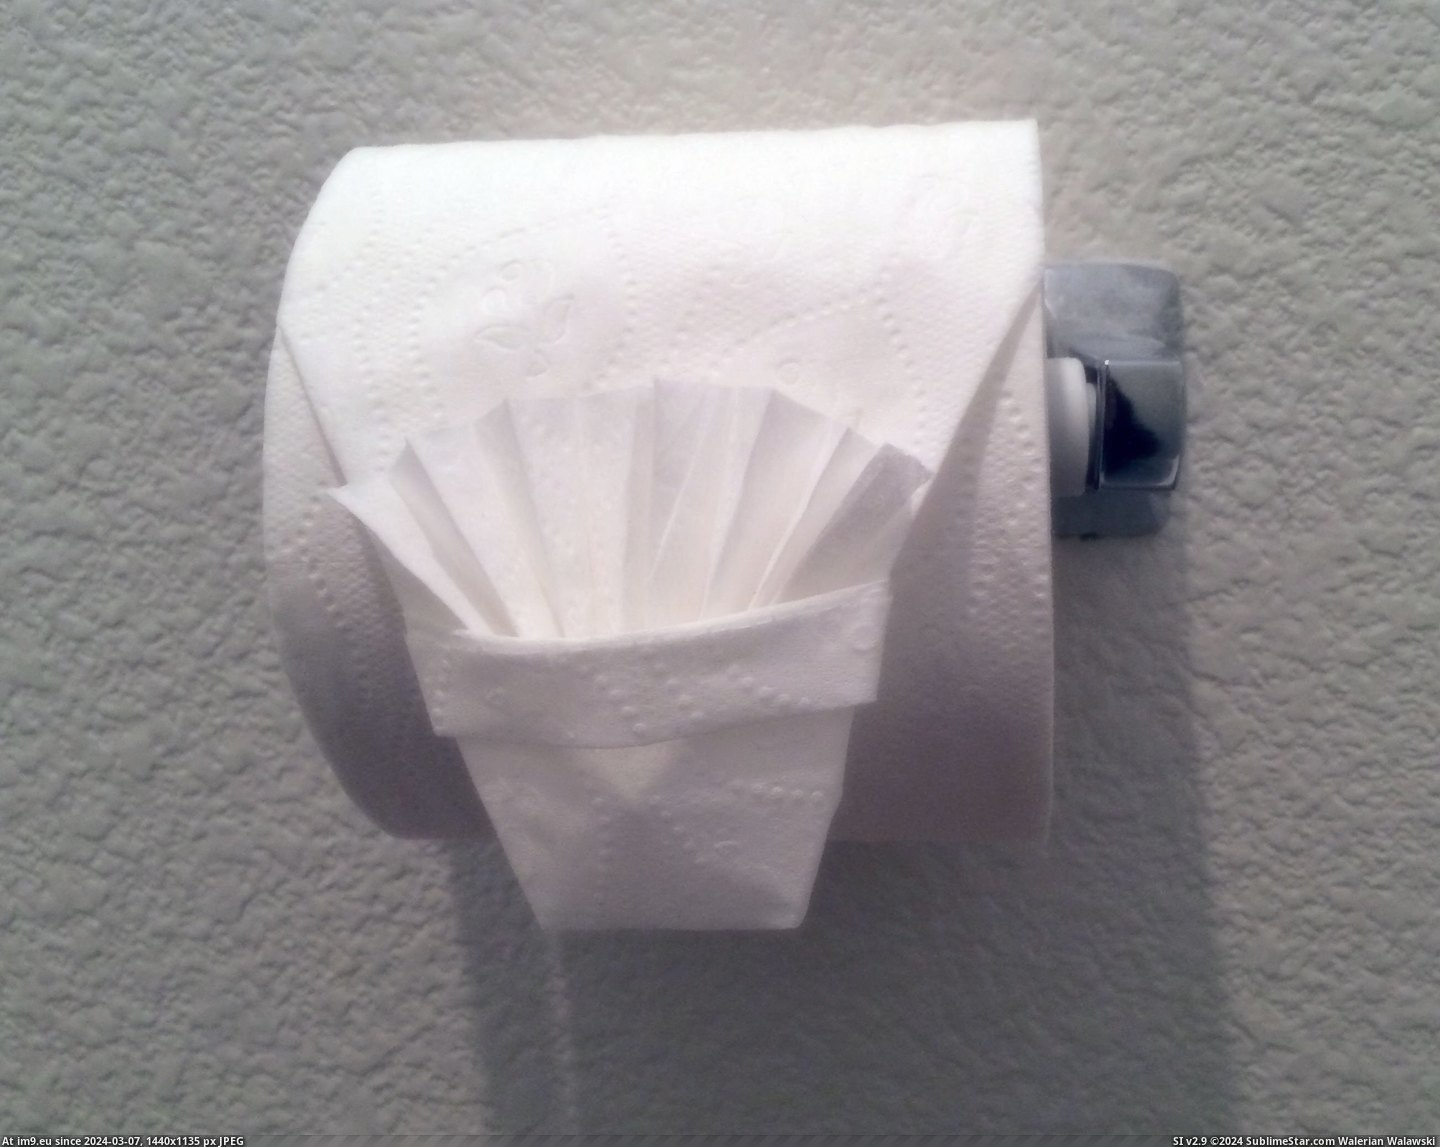 #Funny #Big #Fancy #Kidding #Parties #Origami #Ing #Houses #Guests [Funny] Whenever I go to parties at big fancy houses, I origami the TP so other guests are like 'Are you f-ing kidding me?' Pic. (Изображение из альбом My r/FUNNY favs))